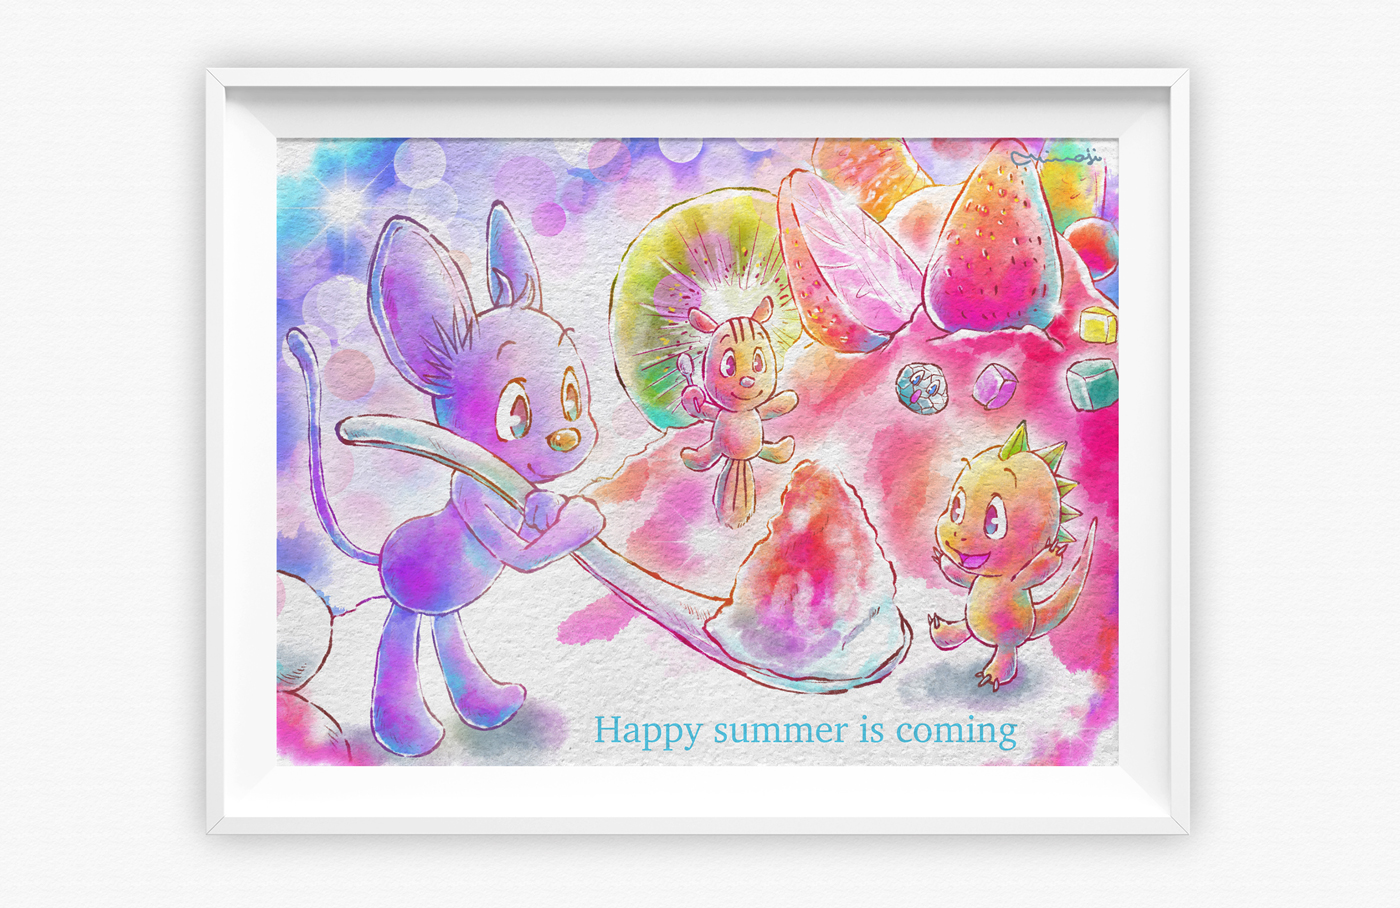 illustration-200607-01-happy-summer-is-coming